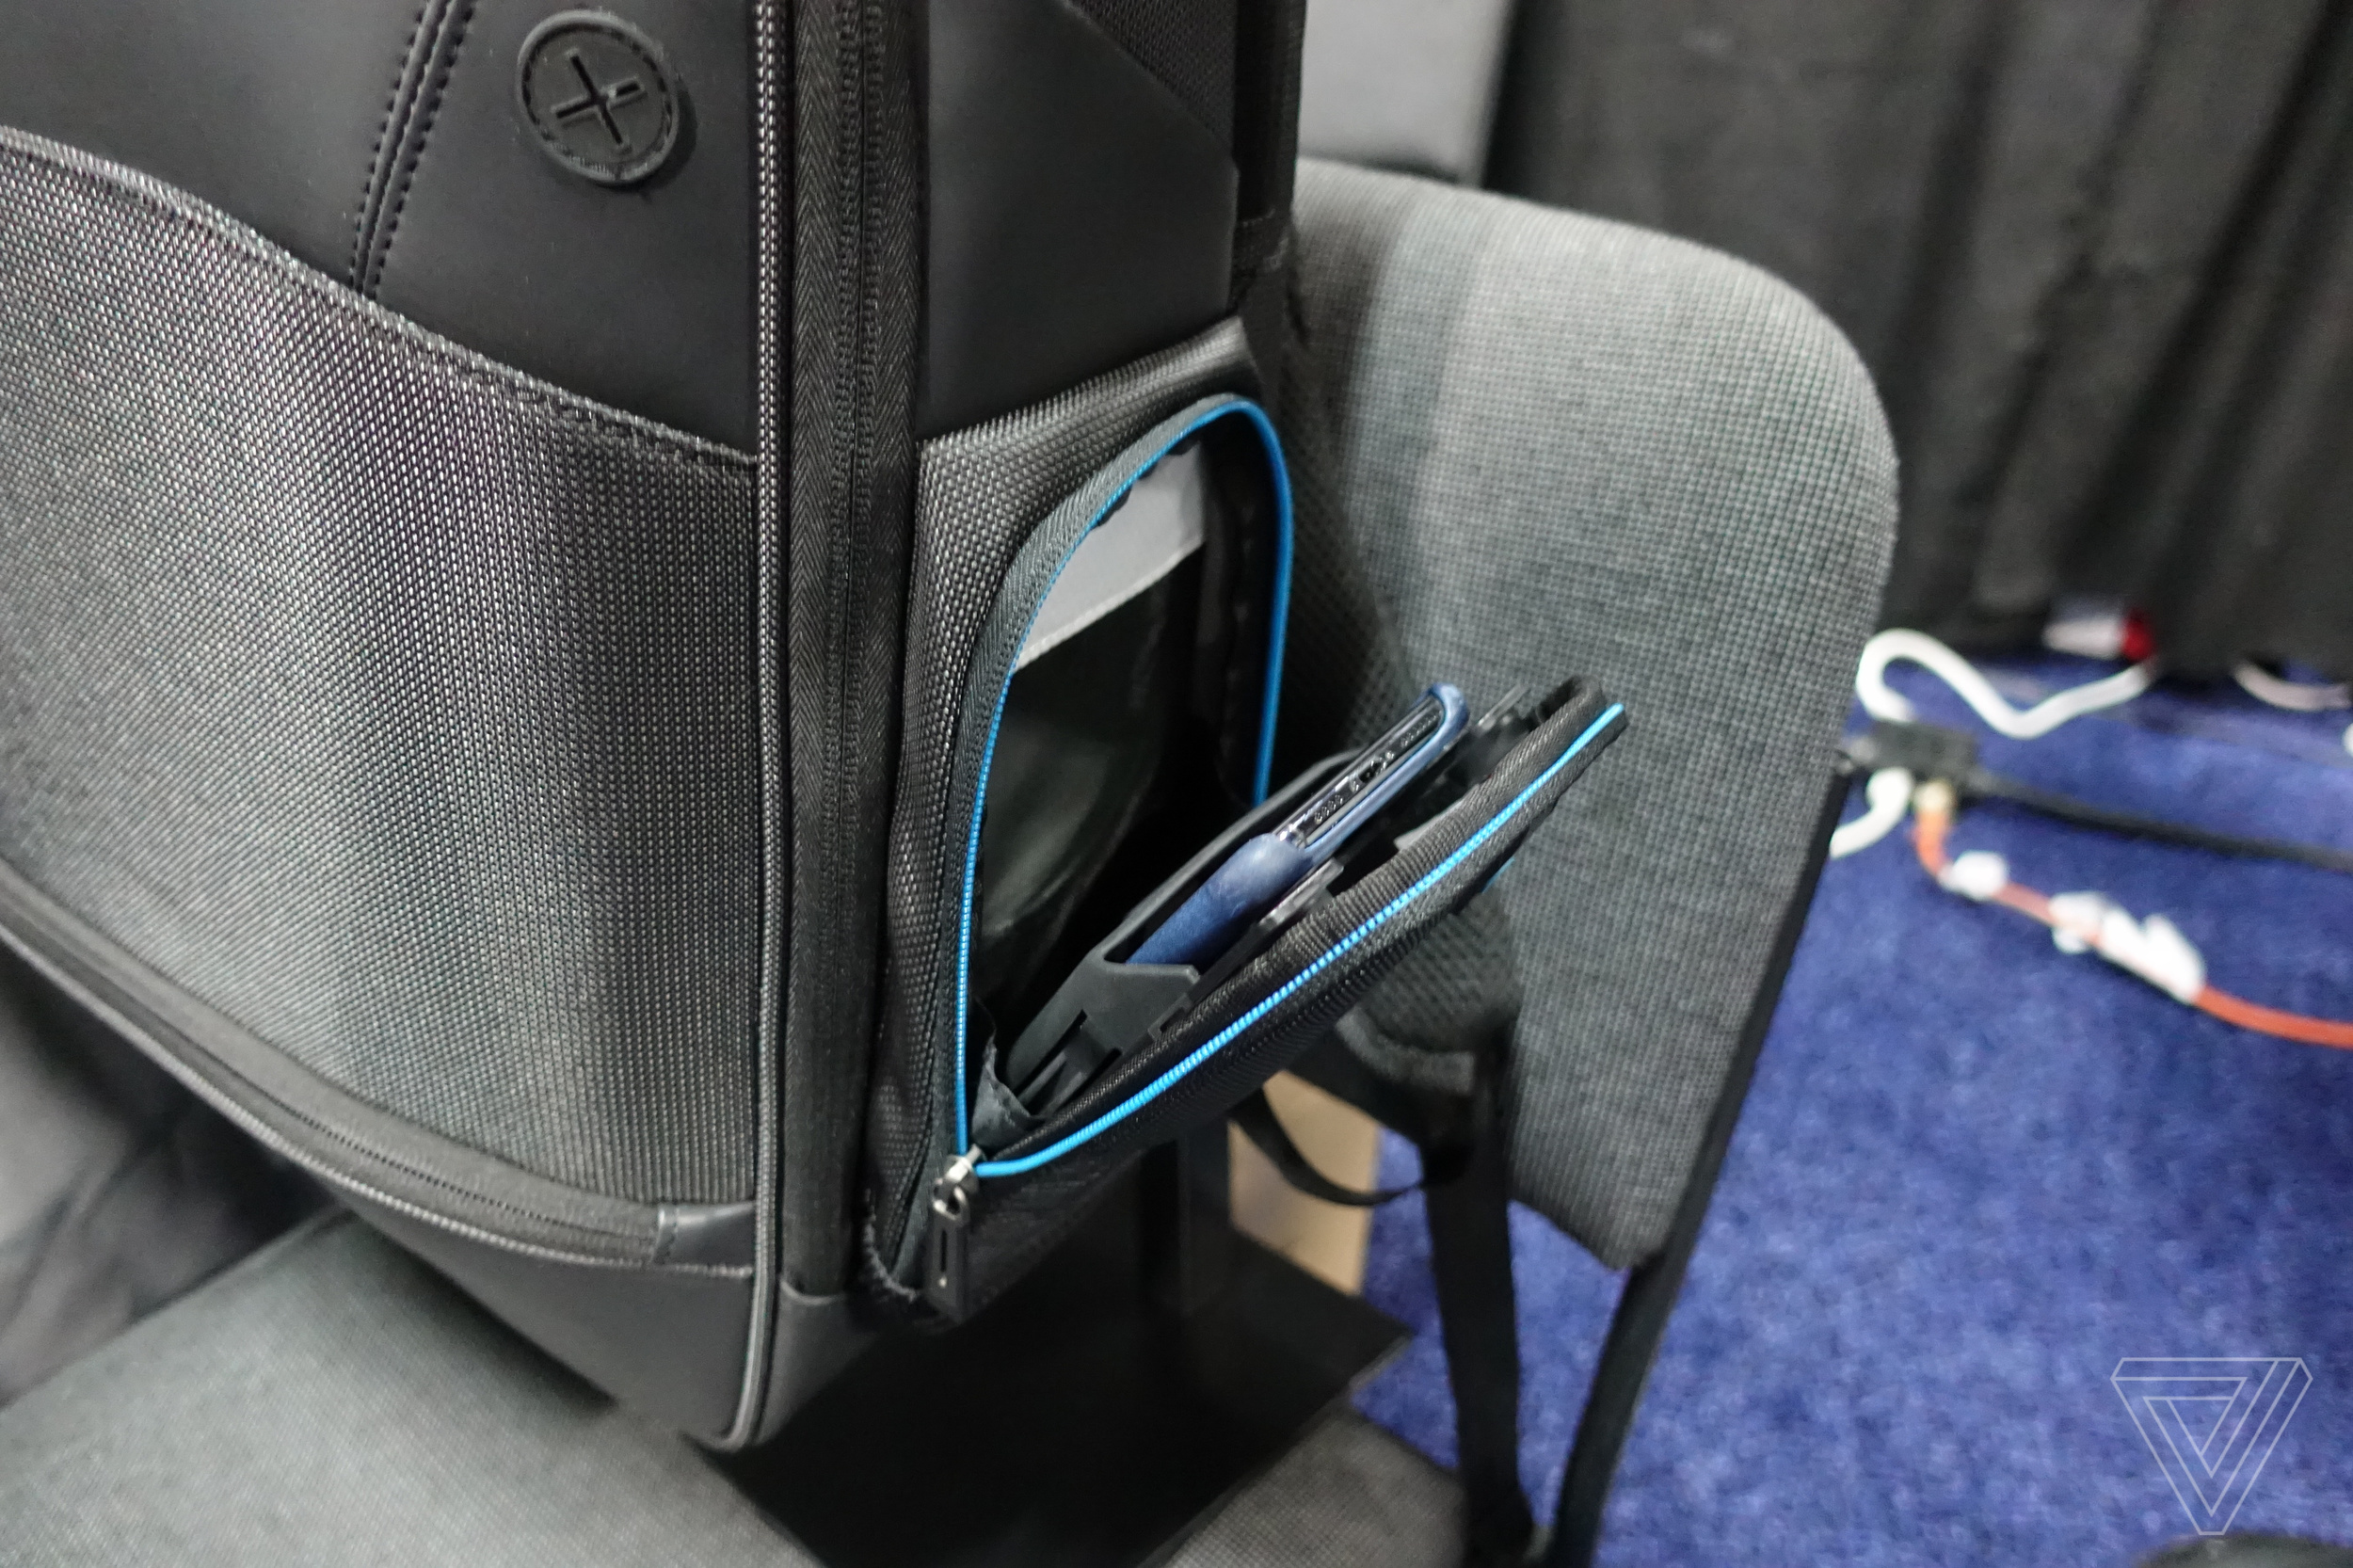 You are currently viewing Targus backpack with Qi Wireless charging pocket